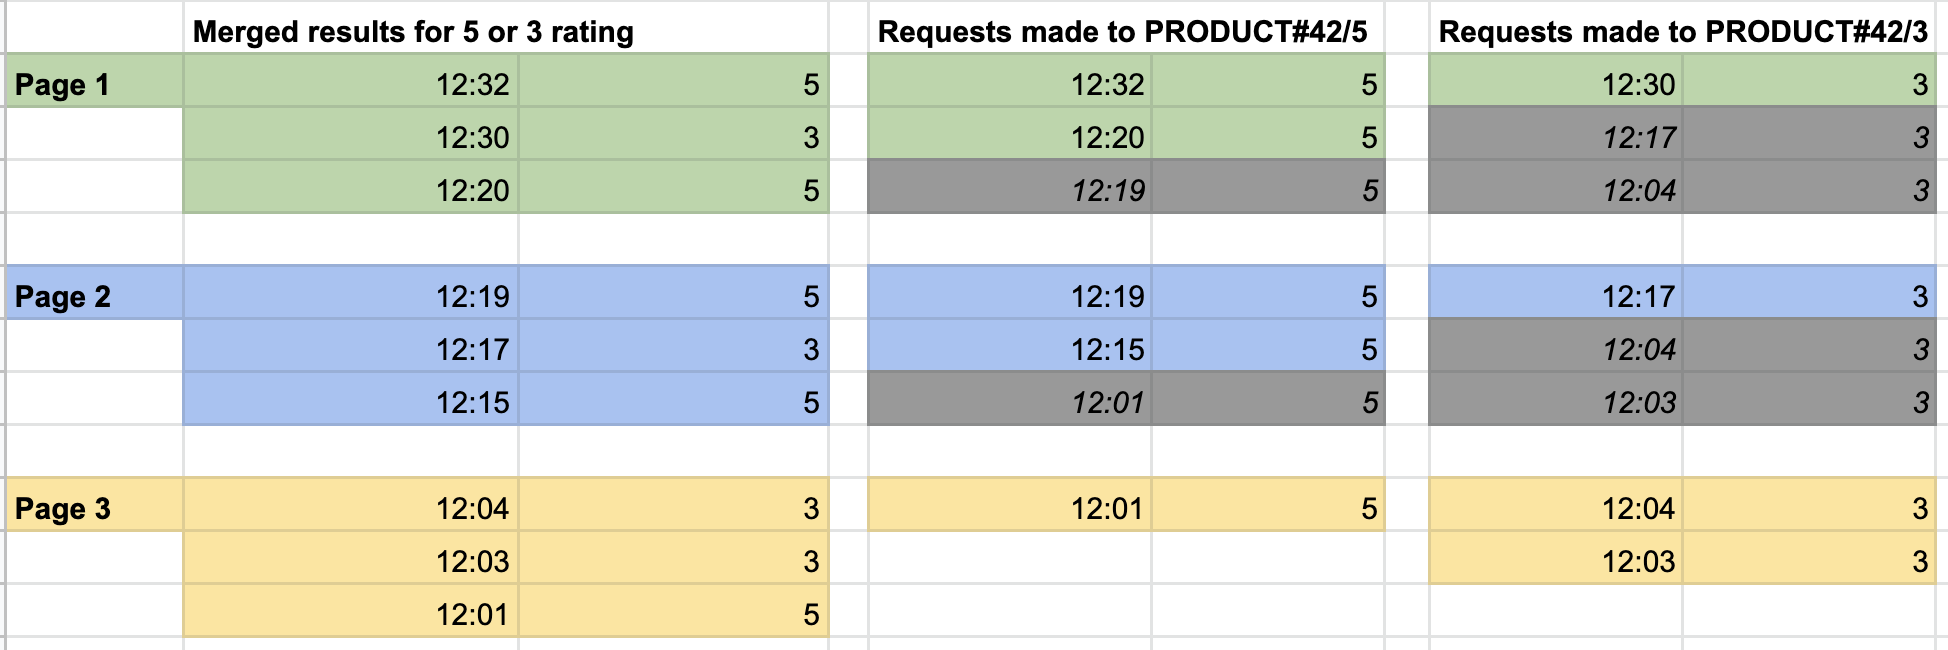 Pagination grid - actual table coming soon!